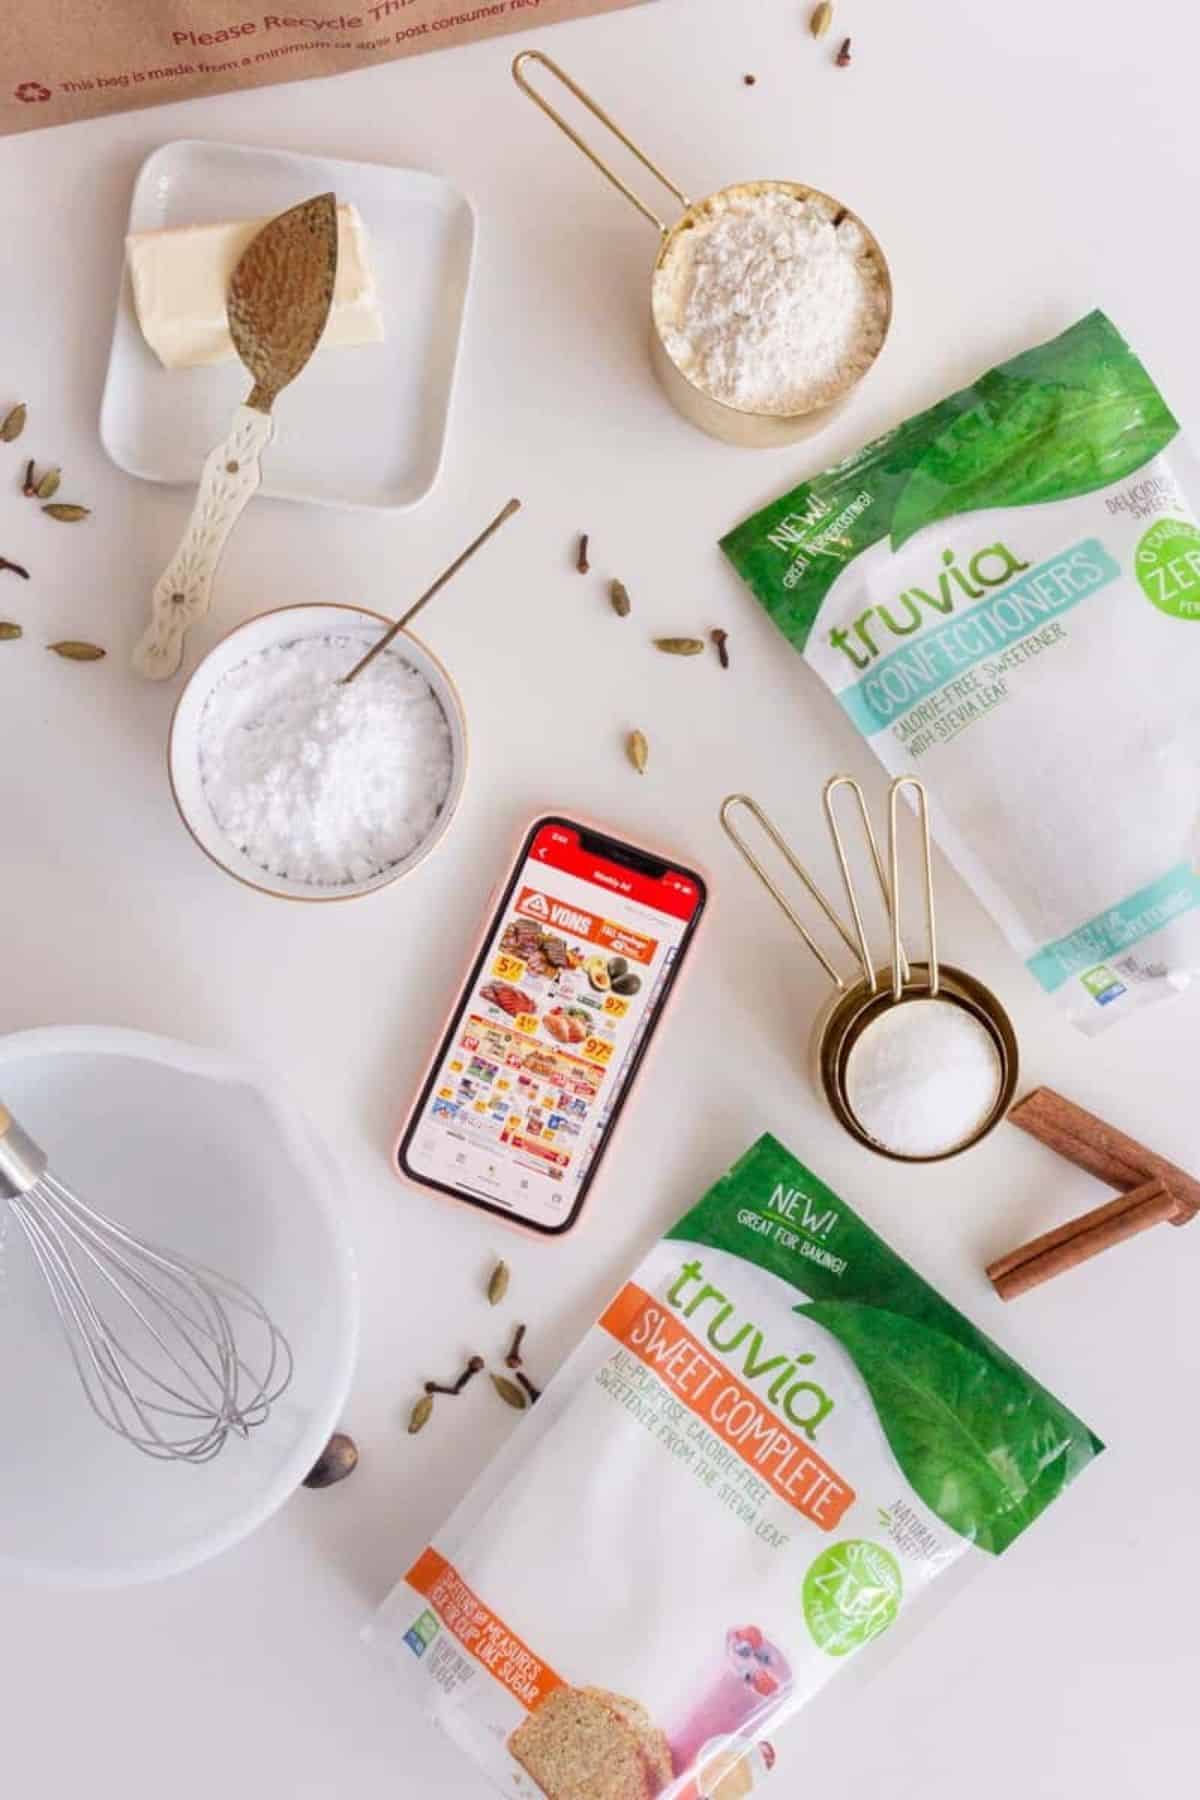 Vons app, Truvia, and ingredients